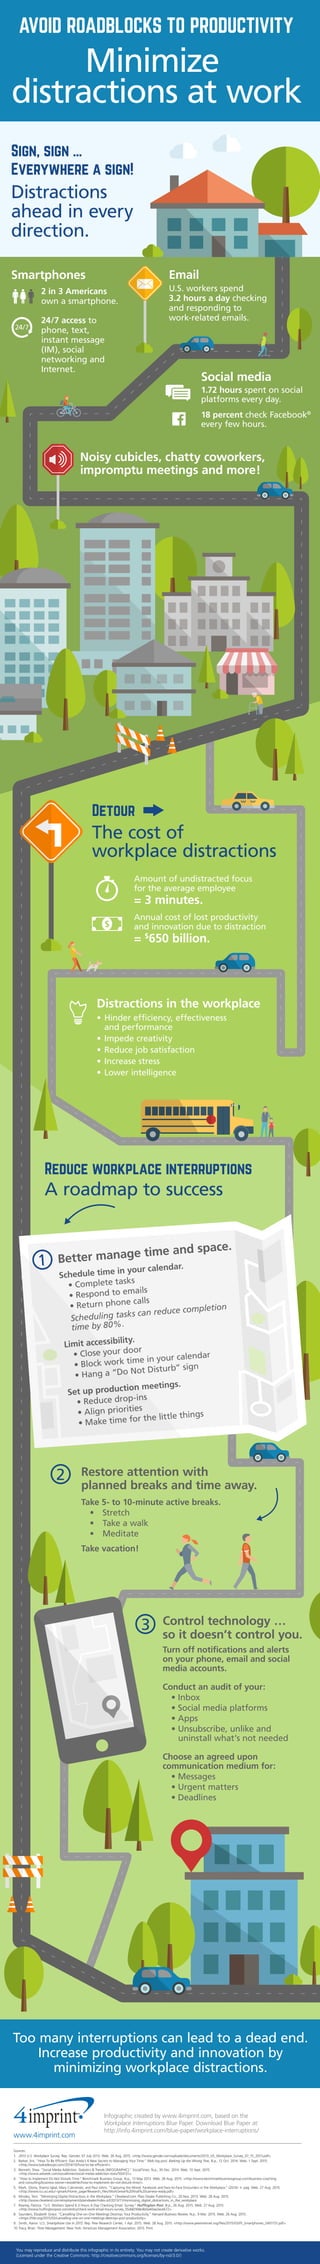 Minimize
distractions at work
AVOID ROADBLOCKS TO PRODUCTIVITY
Smartphones
Noisy cubicles, chatty coworkers,
impromptu meetings and more!
Social media
1.72 hours spent on social
platforms every day.
18 percent check Facebook®
every few hours.
Email
U.S. workers spend
3.2 hours a day checking
and responding to
work-related emails.
Amount of undistracted focus
for the average employee
= 3 minutes.
Distractions in the workplace
• Hinder efficiency, effectiveness
and performance
• Impede creativity
• Reduce job satisfaction
• Increase stress
• Lower intelligence
Reduce workplace interruptions
A roadmap to success
2
3
Sources:
1. 2013 U.S. Workplace Survey. Rep. Gensler, 07 July 2013. Web. 26 Aug. 2015. <http://www.gensler.com/uploads/documents/2013_US_Workplace_Survey_07_15_2013.pdf>.
2. Barker, Eric. “How To Be Efficient: Dan Ariely's 6 New Secrets to Managing Your Time.” Web log post. Barking Up the Wrong Tree. N.p., 12 Oct. 2014. Web. 1 Sept. 2015.
<http://www.bakadesuyo.com/2014/10/how-to-be-efficient/>.
3. Bennett, Shea. “Social Media Addiction: Statistics & Trends [INFOGRAPHIC].” SocialTimes. N.p., 30 Dec. 2014. Web. 10 Sept. 2015.
<http://www.adweek.com/socialtimes/social-media-addiction-stats/504131>.
4. “How to Implement Do Not Disturb Time.” Benchmark Business Group. N.p., 13 May 2013. Web. 28 Aug. 2015. <http://www.benchmarkbusinessgroup.com/business-coaching-
and-consulting/business-owner-newsletter/how-to-implement-do-not-disturb-time/>.
5. Mark, Gloria, Shamsi Iqbal, Mary Czerwinski, and Paul Johns. “Capturing the Mood: Facebook and Face-to-Face Encounters in the Workplace.” (2014): n. pag. Web. 27 Aug. 2015.
<http://www.ics.uci.edu/~gmark/Home_page/Research_files/WorkSense%20final%20camera-ready.pdf>.
6. Mrosko, Terri. “Minimizing Digital Distractions in the Workplace.” Cleveland.com. Plain Dealer Publishing Co., 20 Nov. 2013. Web. 28 Aug. 2015.
<http://www.cleveland.com/employment/plaindealer/index.ssf/2013/11/minimizing_digital_distractions_in_the_workplace
7. Reaney, Patricia. “U.S. Workers Spend 6.3 Hours A Day Checking Email: Survey.” Huffington Post. N.p., 26 Aug. 2015. Web. 27 Aug. 2015.
<http://www.huffingtonpost.com/entry/check-work-email-hours-survey_55ddd168e4b0a40aa3ace672>.
8. Saunders, Elizabeth Grace. “Cancelling One-on-One Meetings Destroys Your Productivity.” Harvard Business Review. N.p., 9 Mar. 2015. Web. 26 Aug. 2015.
<https://hbr.org/2015/03/cancelling-one-on-one-meetings-destroys-your-productivity>.
9. Smith, Aaron. U.S. Smartphone Use in 2015. Rep. Pew Research Center, 1 Apr. 2015. Web. 28 Aug. 2015. <http://www.pewinternet.org/files/2015/03/PI_Smartphones_0401151.pdf>.
10.Tracy, Brian. Time Management. New York: American Management Association, 2013. Print.
You may reproduce and distribute this infographic in its entirety. You may not create derivative works.
(Licensed under the Creative Commons: http://creativecommons.org/licenses/by-nd/3.0/)
www.4imprint.com
Infographic created by www.4imprint.com, based on the
Workplace Interruptions Blue Paper. Download Blue Paper at:
http://info.4imprint.com/blue-paper/workplace-interruptions/
Too many interruptions can lead to a dead end.
Increase productivity and innovation by
minimizing workplace distractions.
Sign, sign …
Everywhere a sign!
Distractions
ahead in every
direction.
Detour
The cost of
workplace distractions
Restore attention with
planned breaks and time away.
Take 5- to 10-minute active breaks.
• Stretch
• Take a walk
• Meditate
Take vacation!
Control technology …
so it doesn’t control you.
Turn off notifications and alerts
on your phone, email and social
media accounts.
Conduct an audit of your:
• Inbox
• Social media platforms
• Apps
• Unsubscribe, unlike and
uninstall what’s not needed
Choose an agreed upon
communication medium for:
• Messages
• Urgent matters
• Deadlines
Annual cost of lost productivity
and innovation due to distraction
= $
650 billion.
24/7
24/7 access to
phone, text,
instant message
(IM), social
networking and
Internet.
2 in 3 Americans
own a smartphone.
1 Better manage time and space.
Schedule time in your calendar.
• Complete tasks
• Respond to emails
• Return phone calls
Scheduling tasks can reduce completion
time by 80%.
Limit accessibility.
• Close your door
• Block work time in your calendar
• Hang a “Do Not Disturb” sign
Set up production meetings.
• Reduce drop-ins
• Align priorities
• Make time for the little things
 